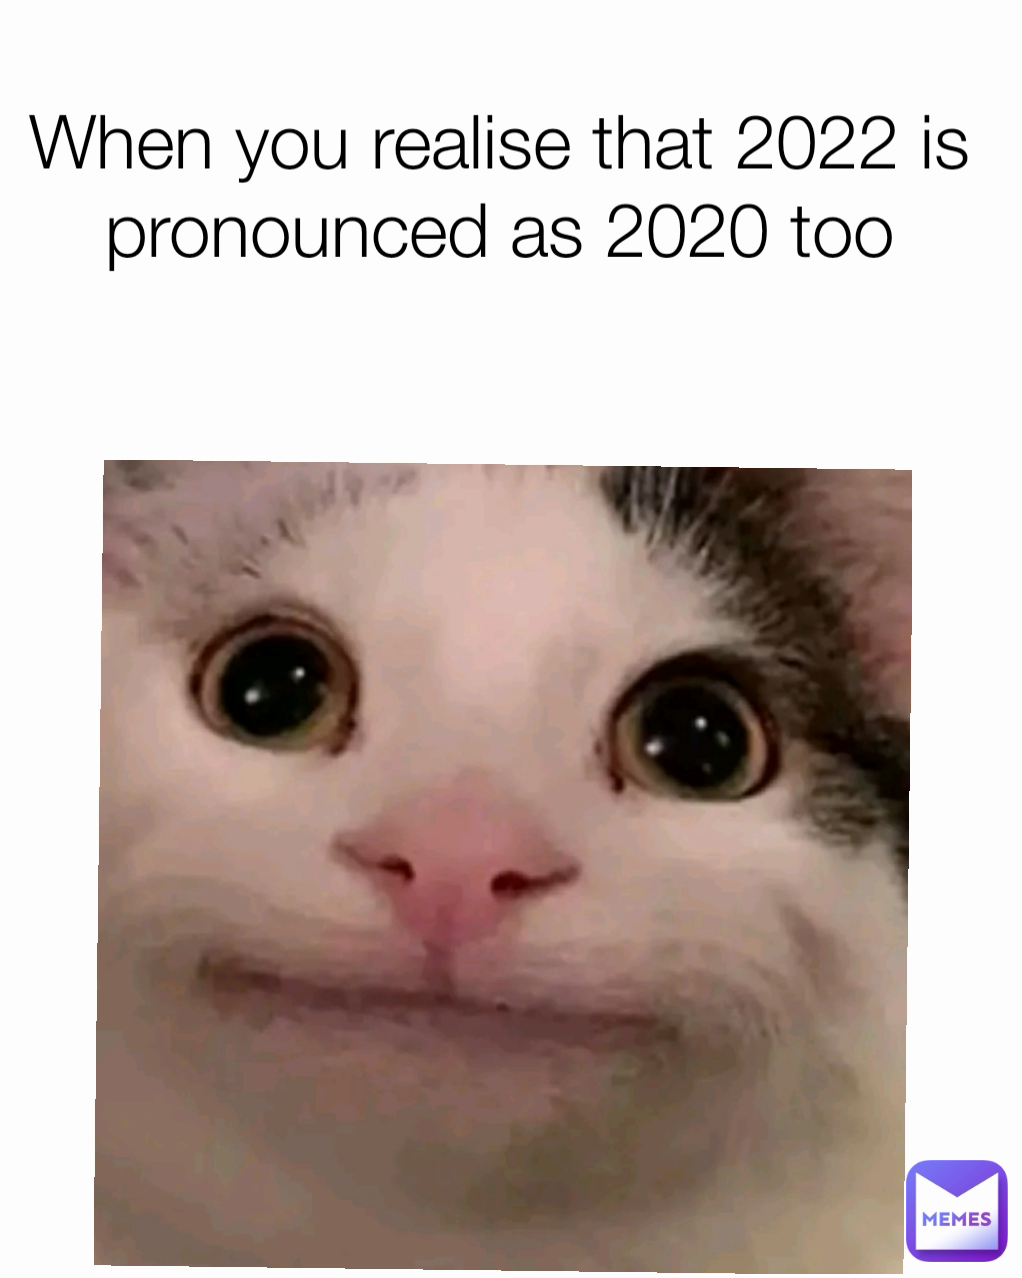 When you realise that 2022 is pronounced as 2020 too